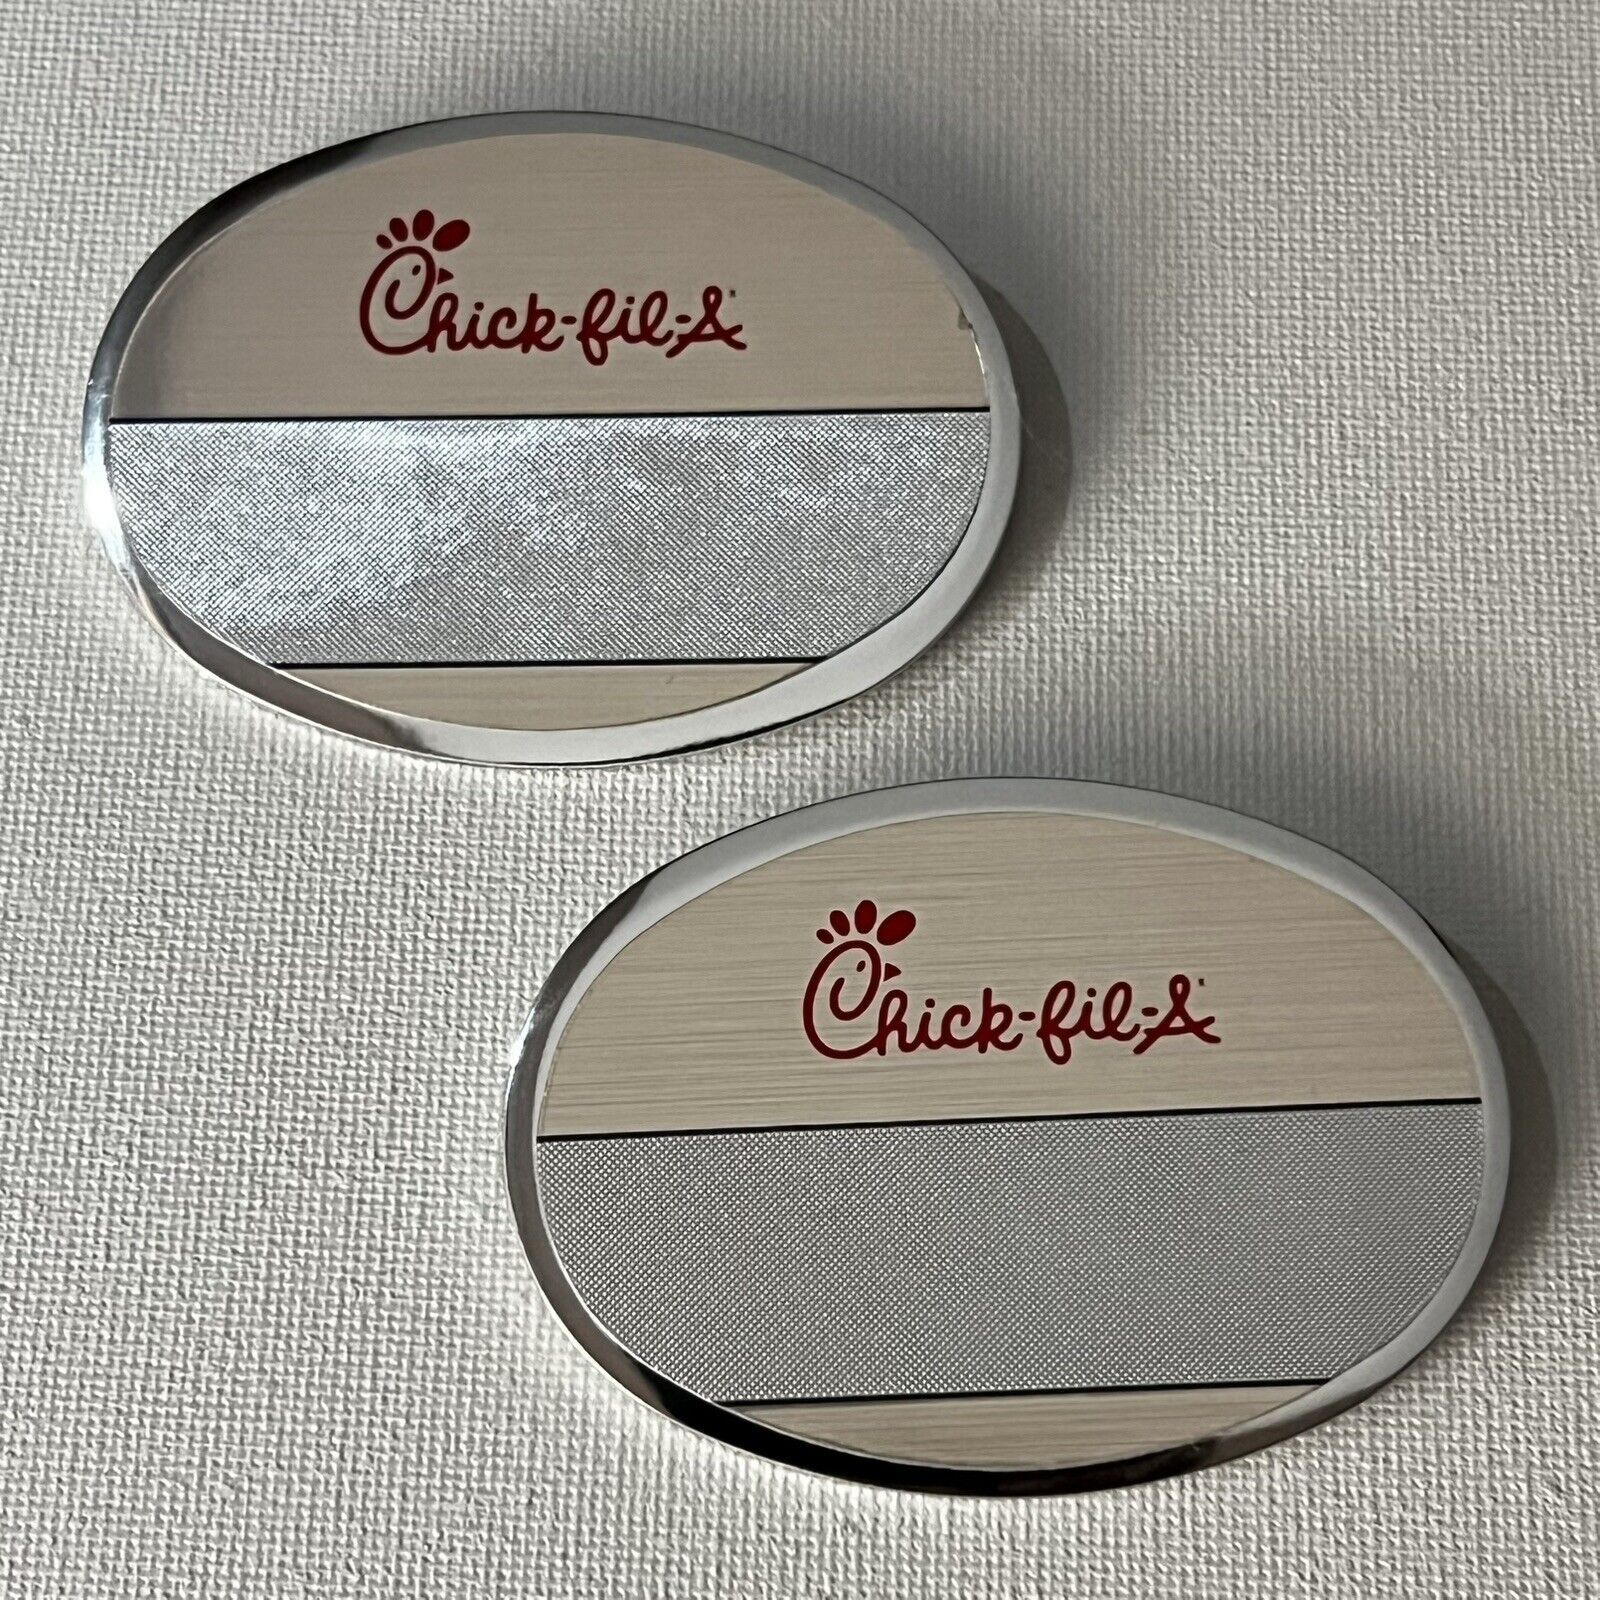 Chick-fil-A Employee Uniform Name Badge Tag Pin - Lot of 2